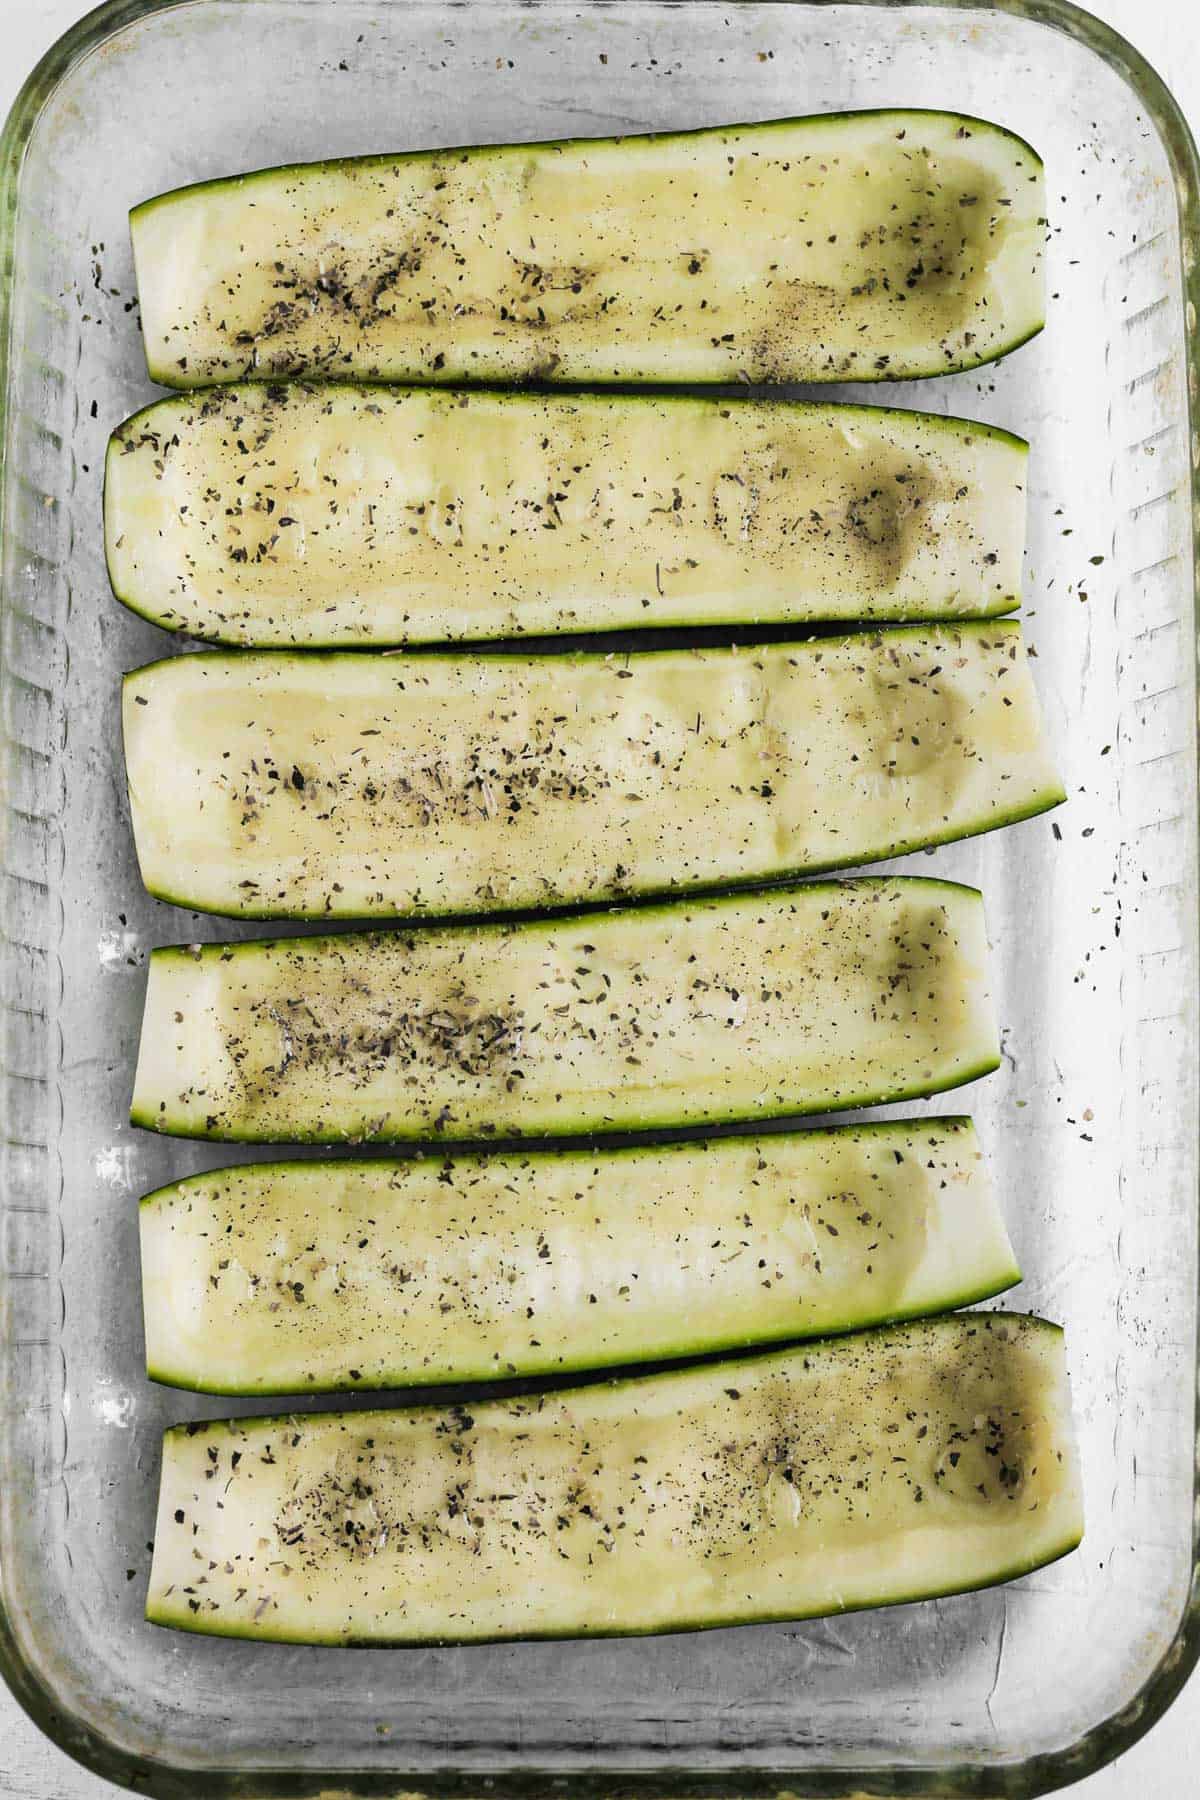 6 seasoned hollowed out zucchini halves in a glass baking dish.